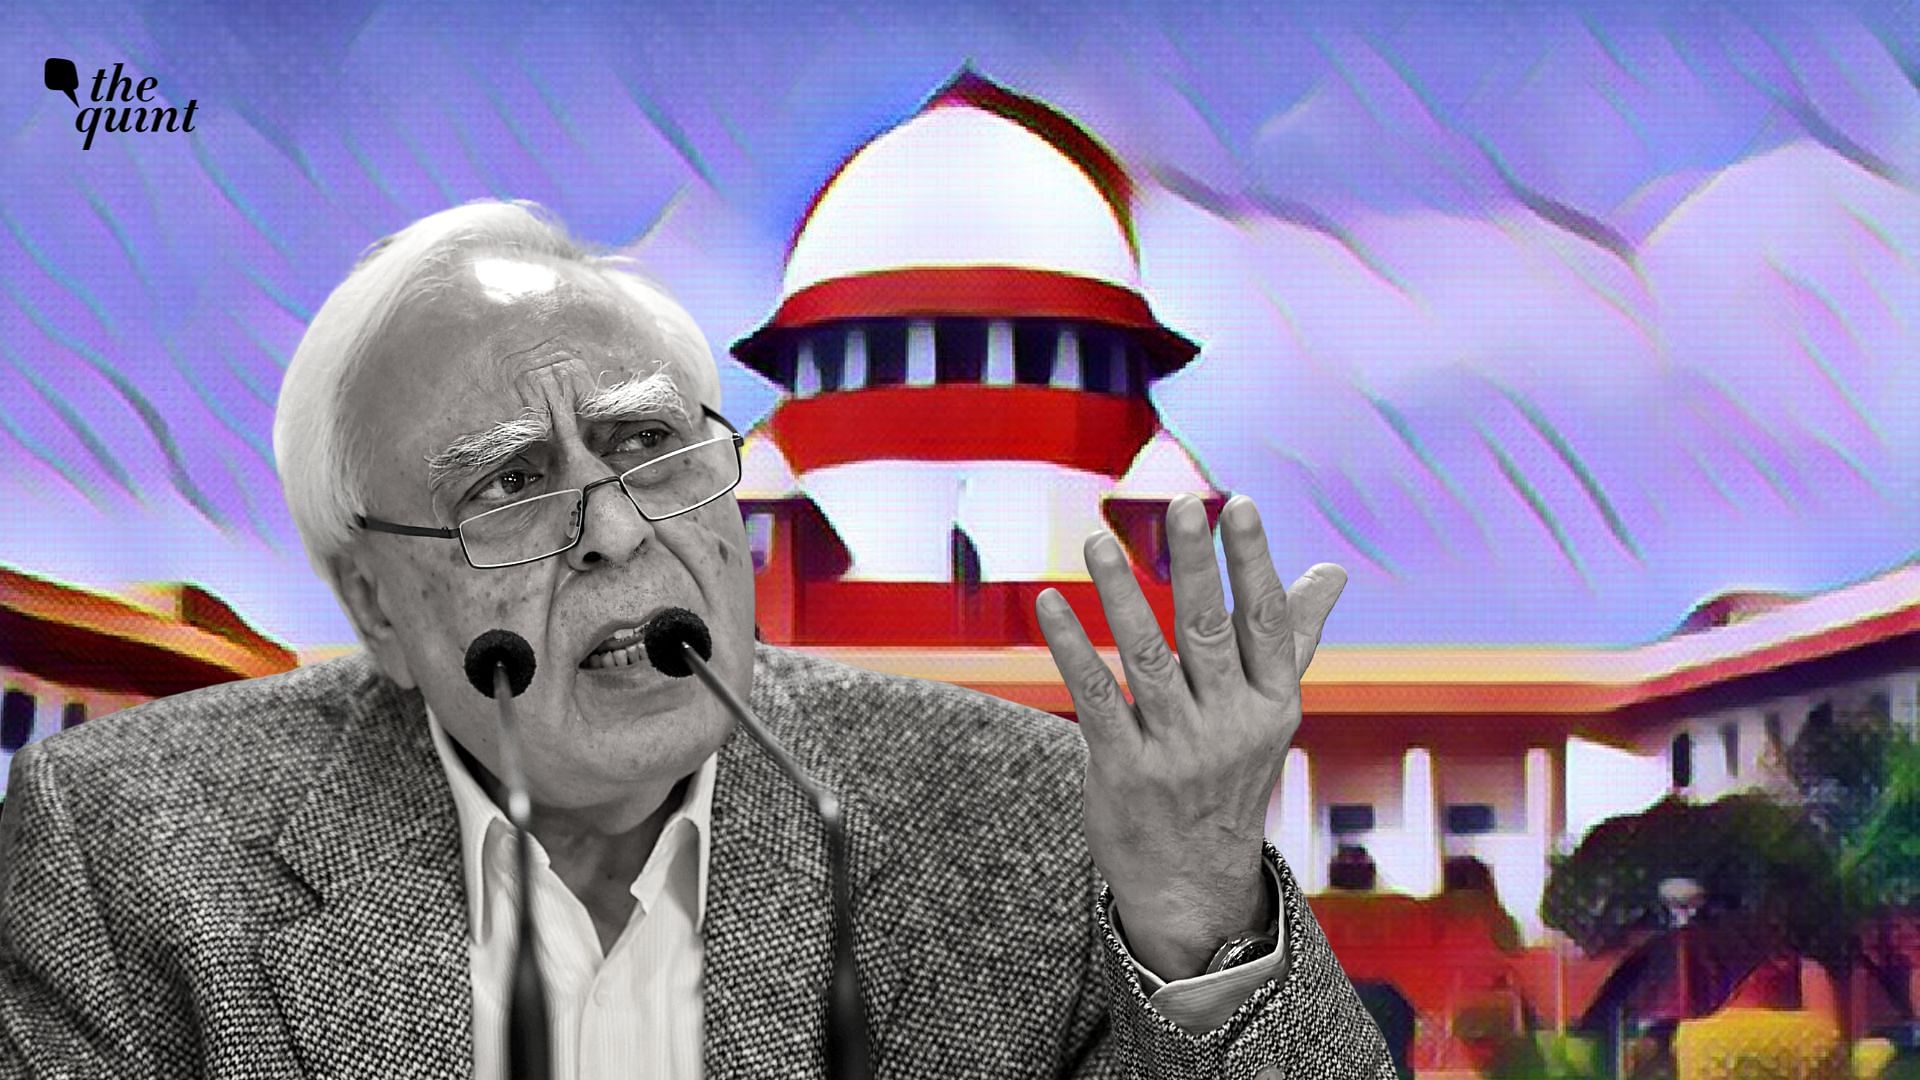 <div class="paragraphs"><p>Two lawyers have filed a request letter with the attorney general of India for his consent to proceed with criminal contempt of court against former Congress leader and senior advocate <a href="https://www.thequint.com/news/india/no-hope-left-in-supreme-court-kapil-sibal-slams-recent-judgements">Kapil Sibal</a> for allegedly "scandalising the Indian judiciary and disgracing its dignity”.</p></div>